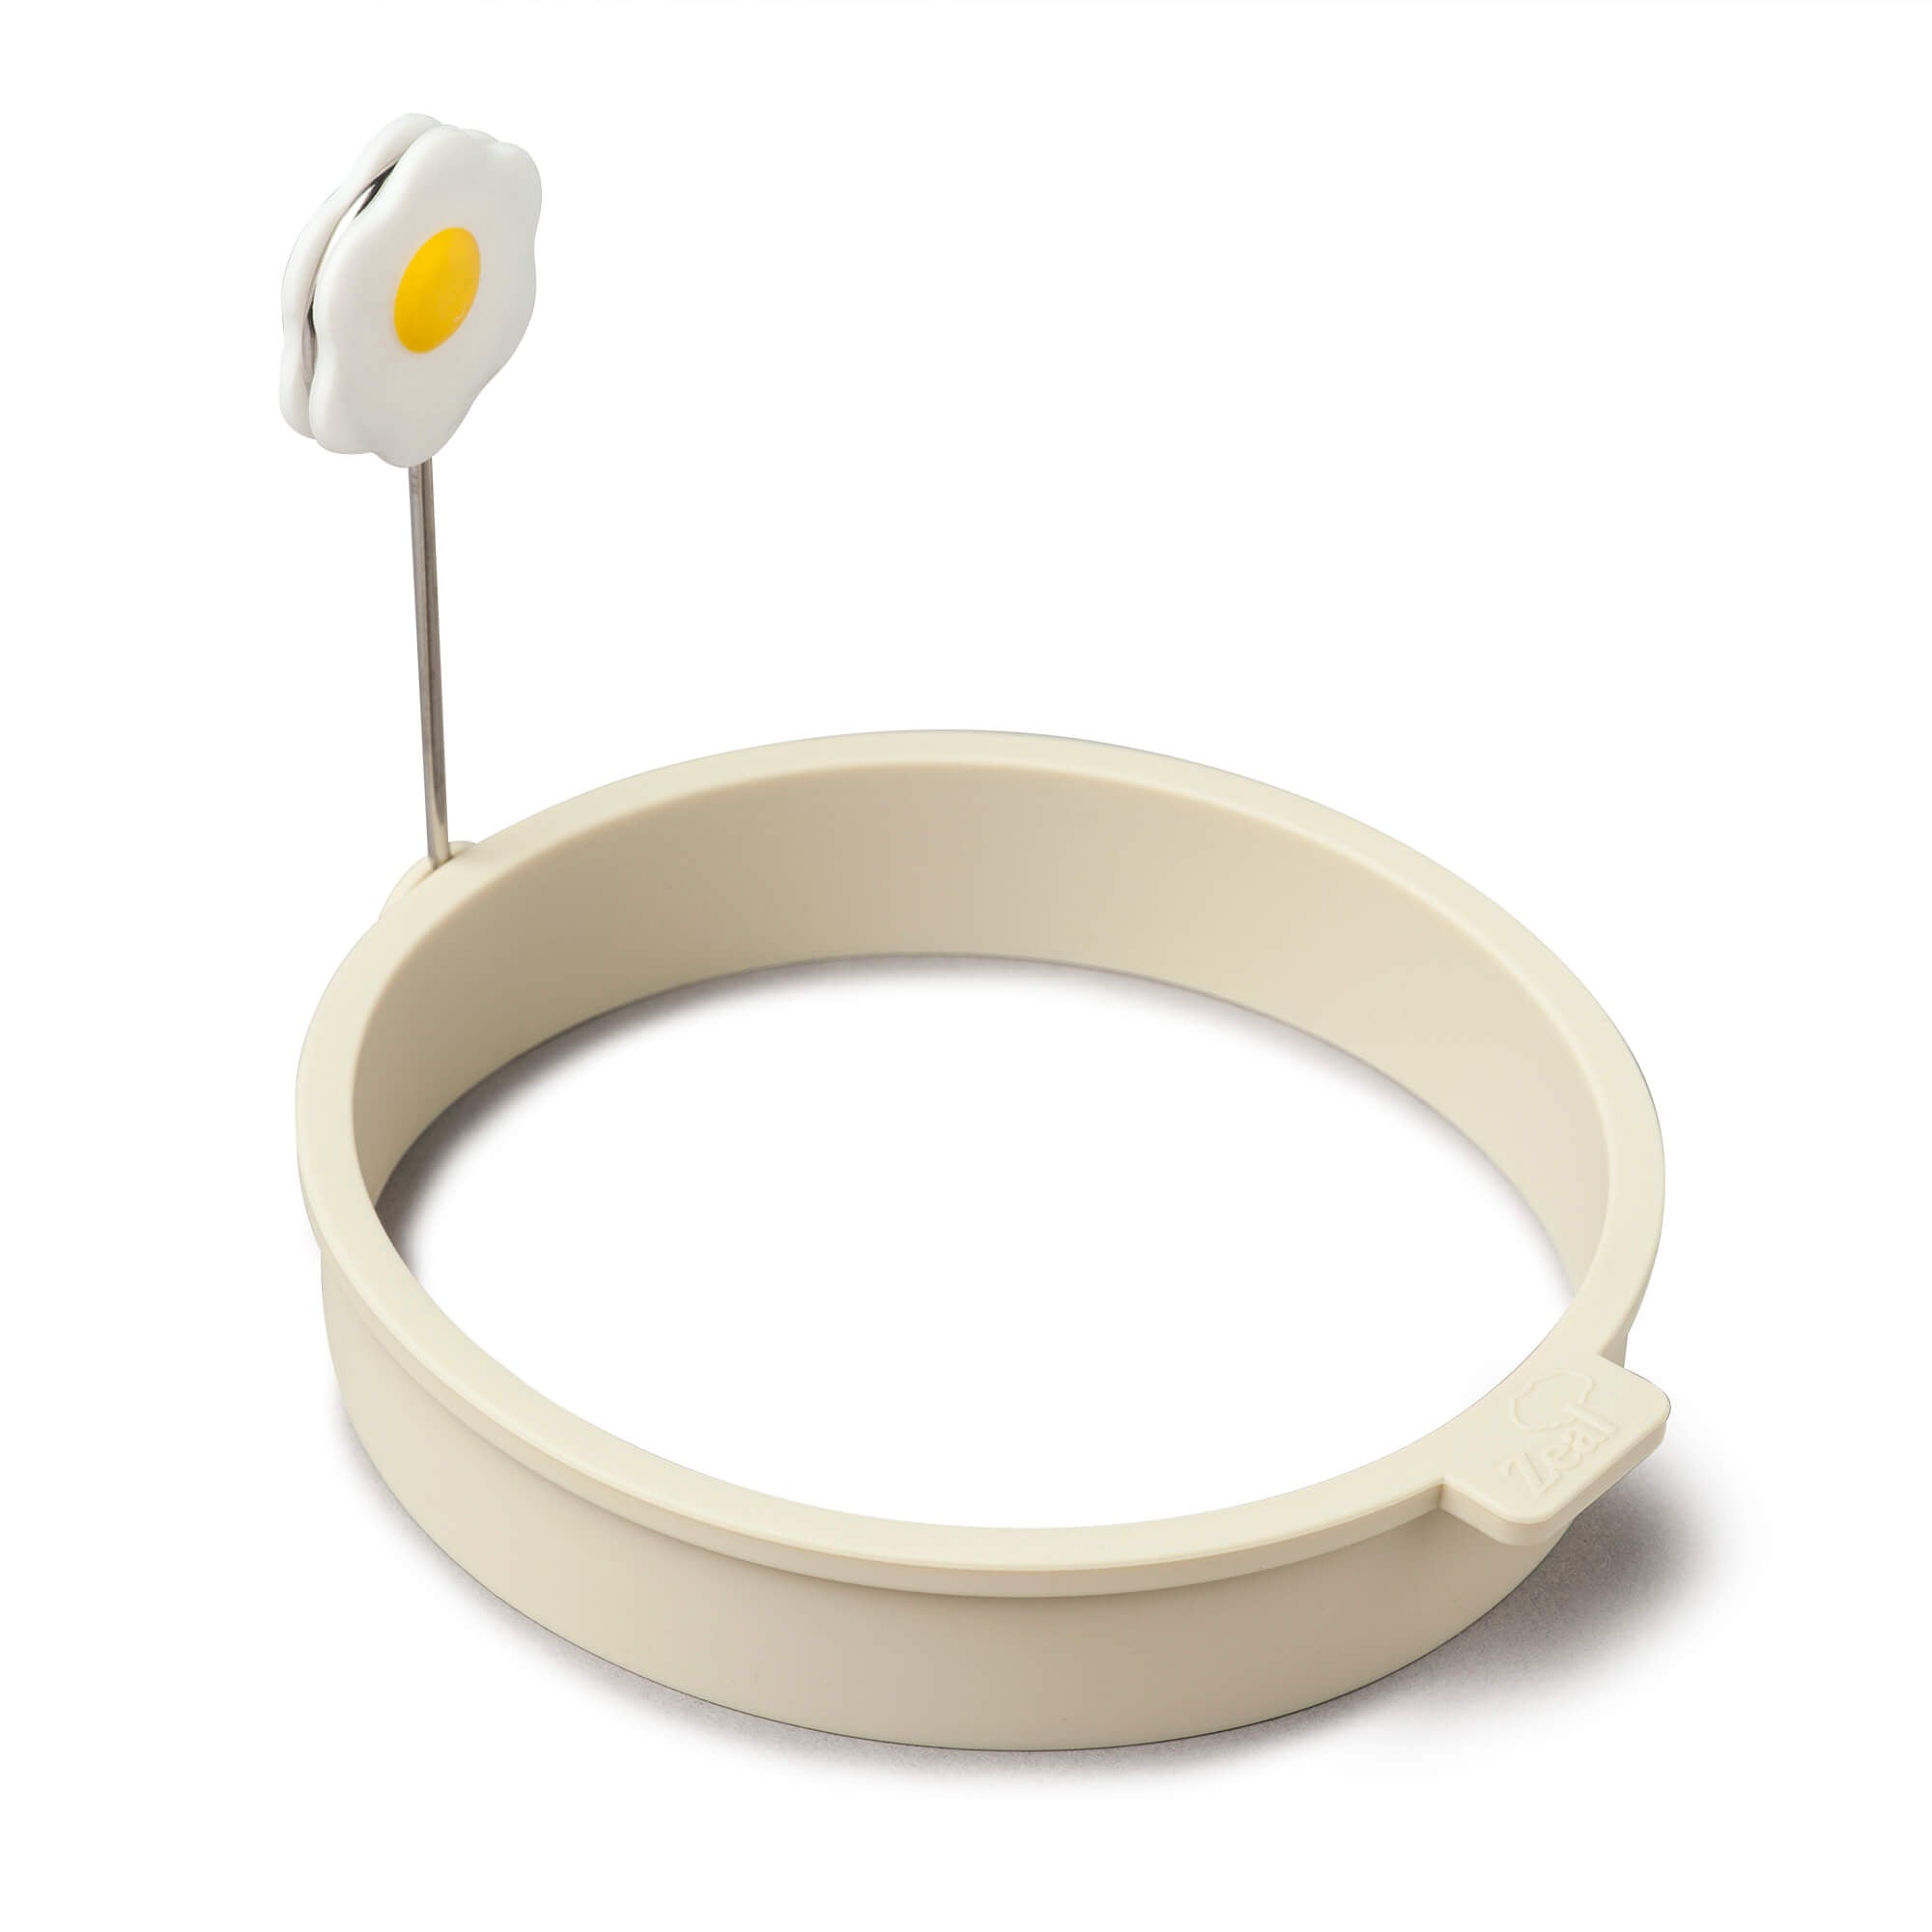 Zeal Silicone Egg Ring in Cream